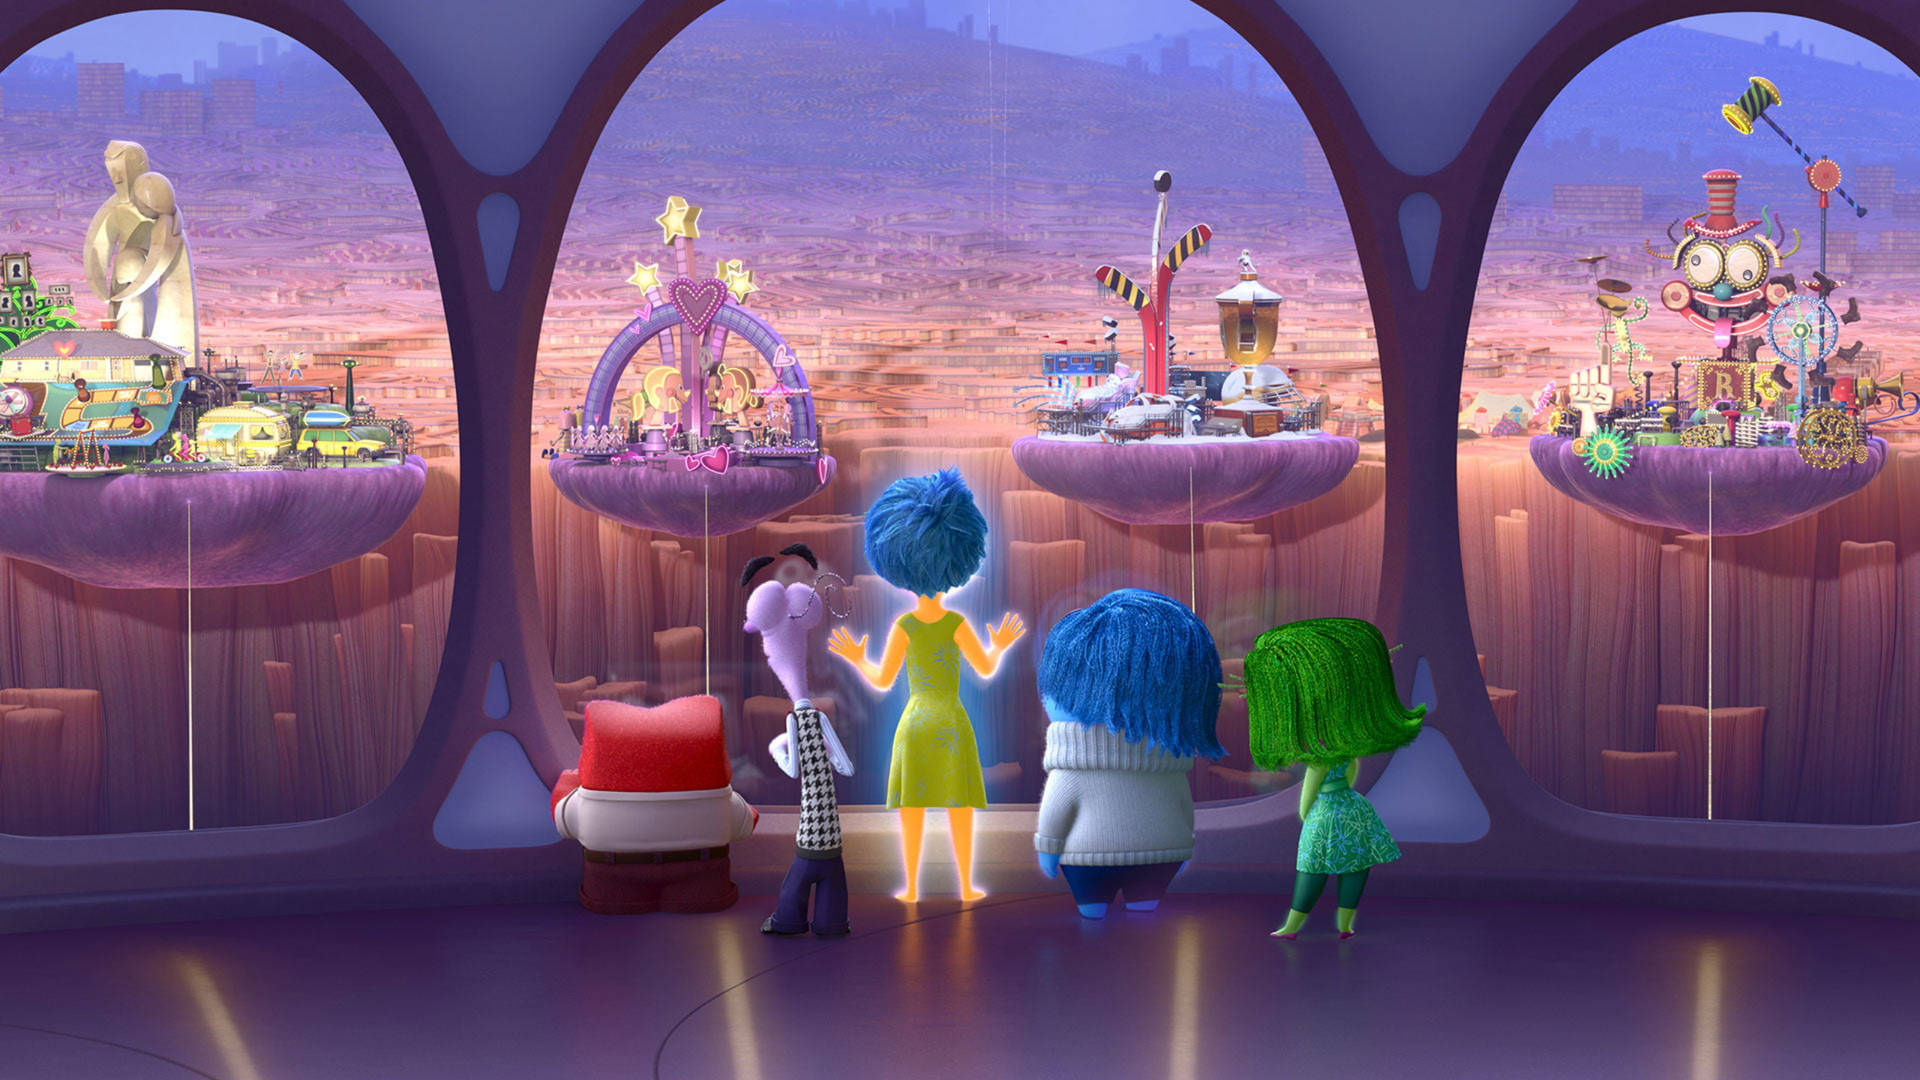 2560x1440 Disney Inside Out Background